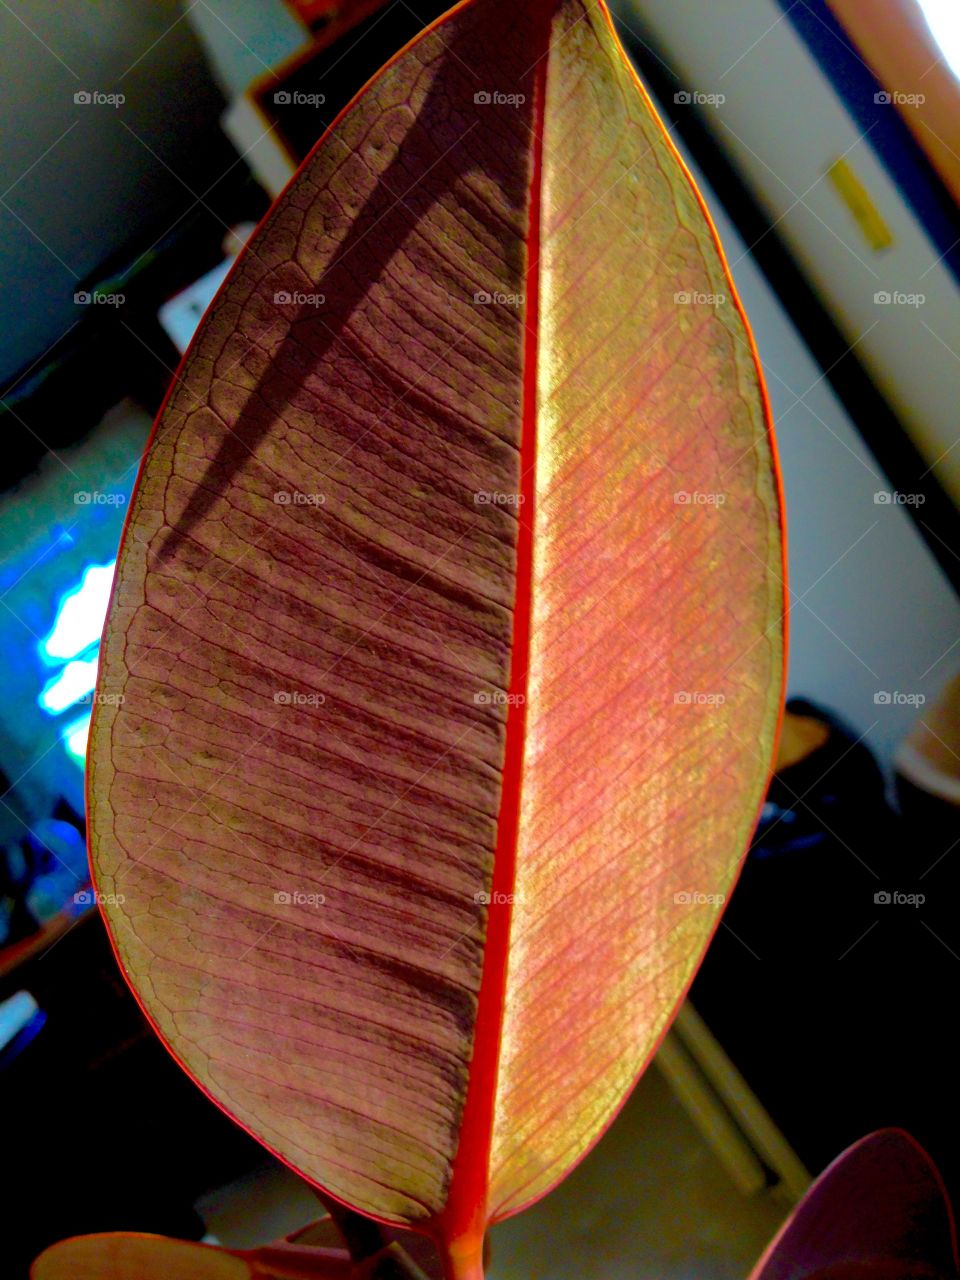 Leaf 1. Back side of a rubber tree plant